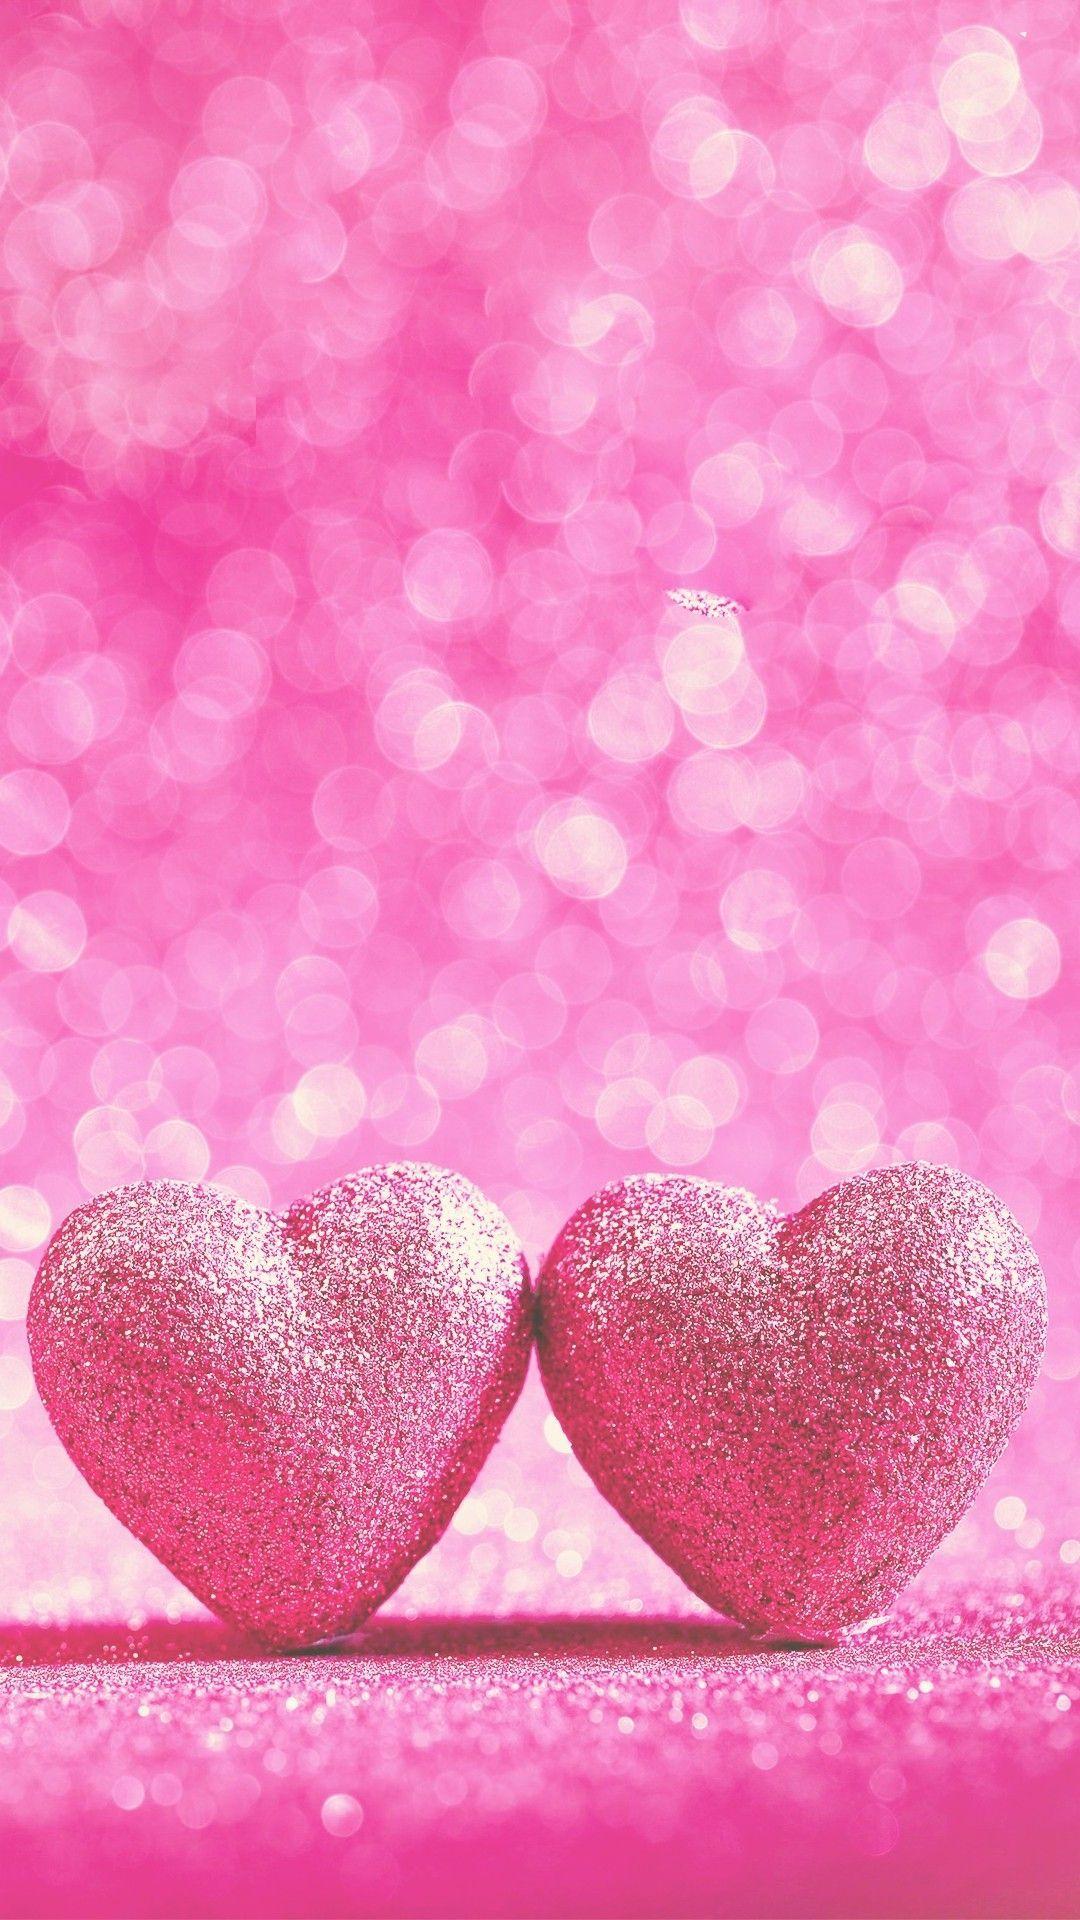 Pink Love Wallpaper Android